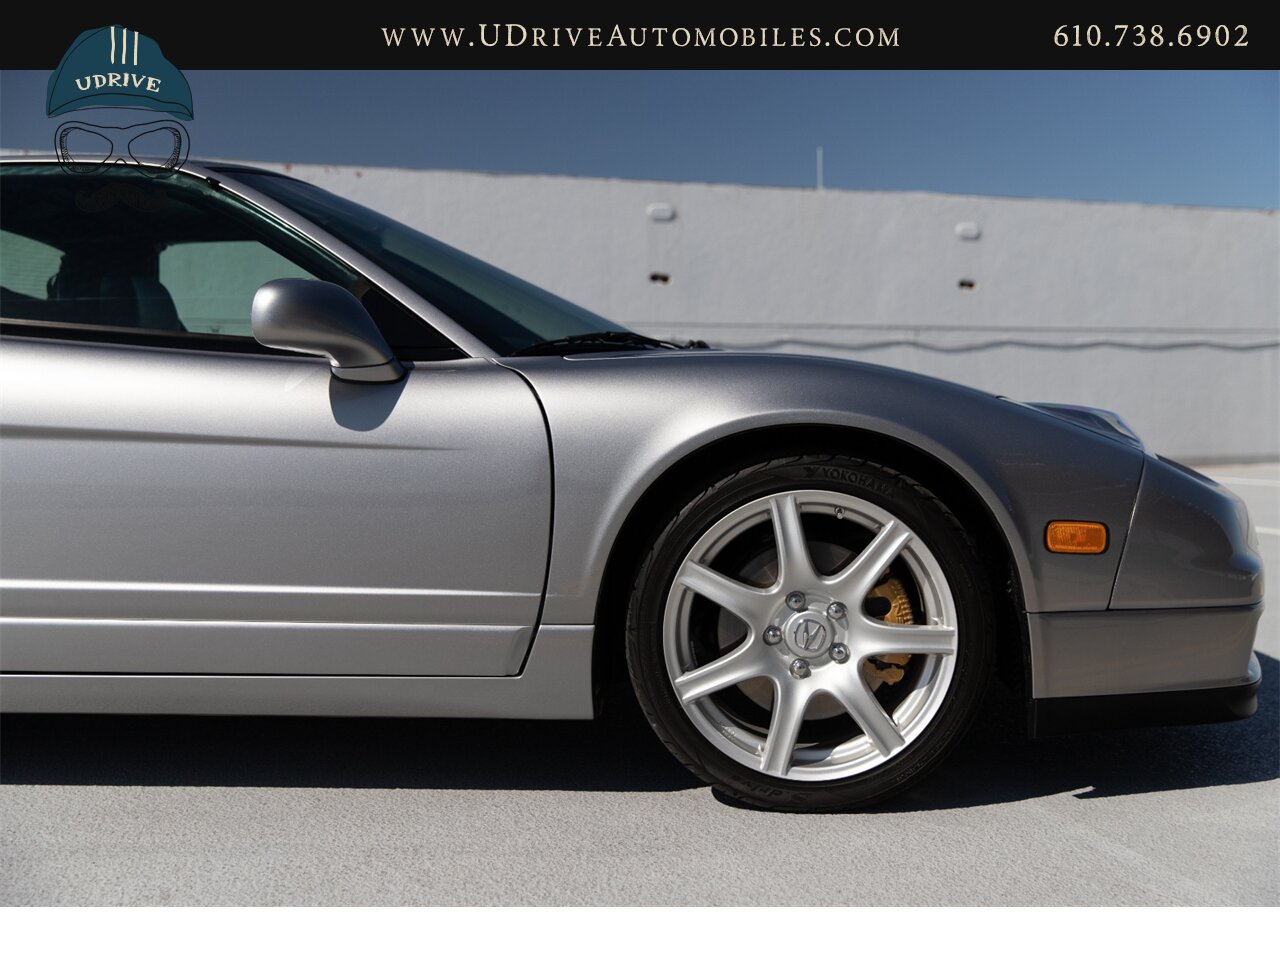 2002 Acura NSX NSX-T 9k Miles 6 Speed Manual Service History  Collector Grade - Photo 16 - West Chester, PA 19382